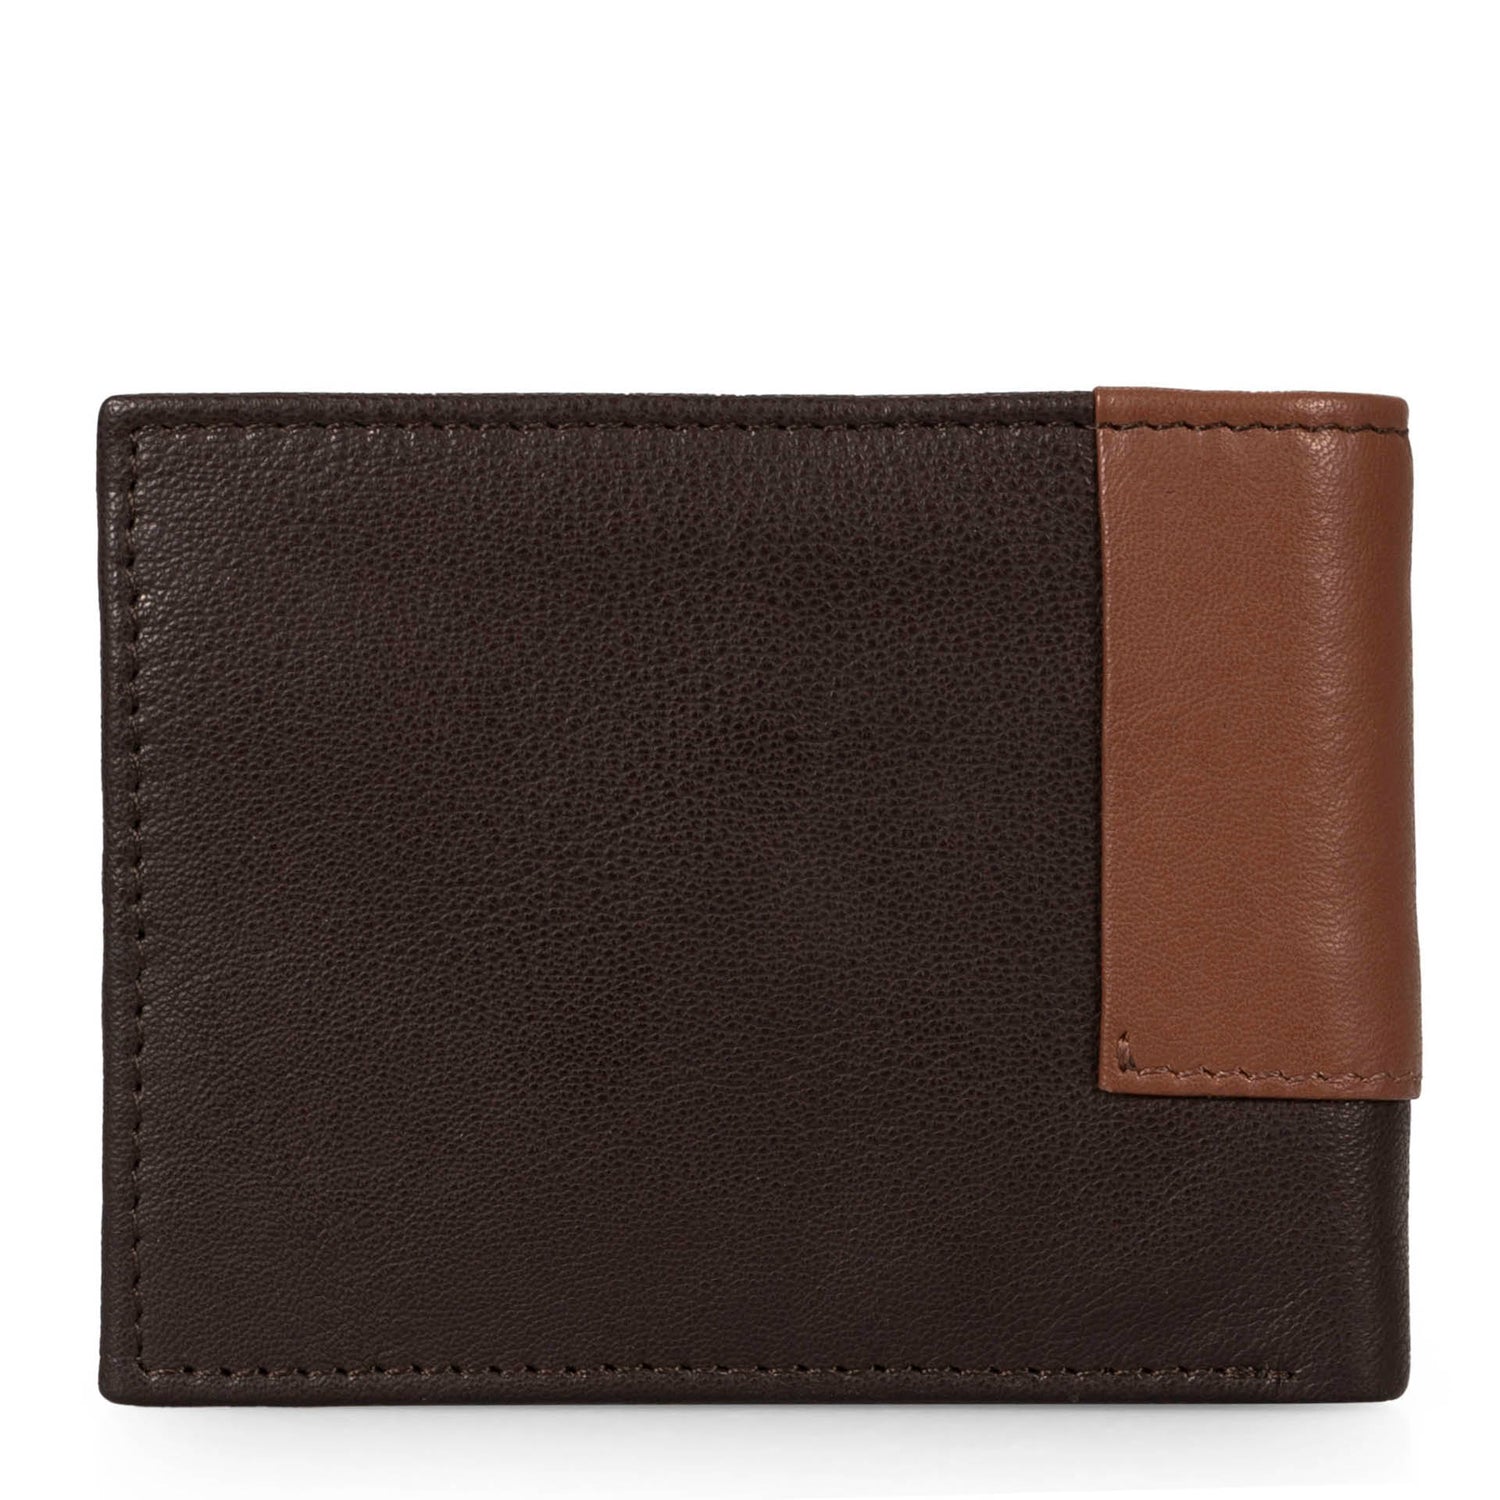 Back side of a dark brown and light brown wallet called Calwood designed by Tracker, showcasing a soft leather texture.